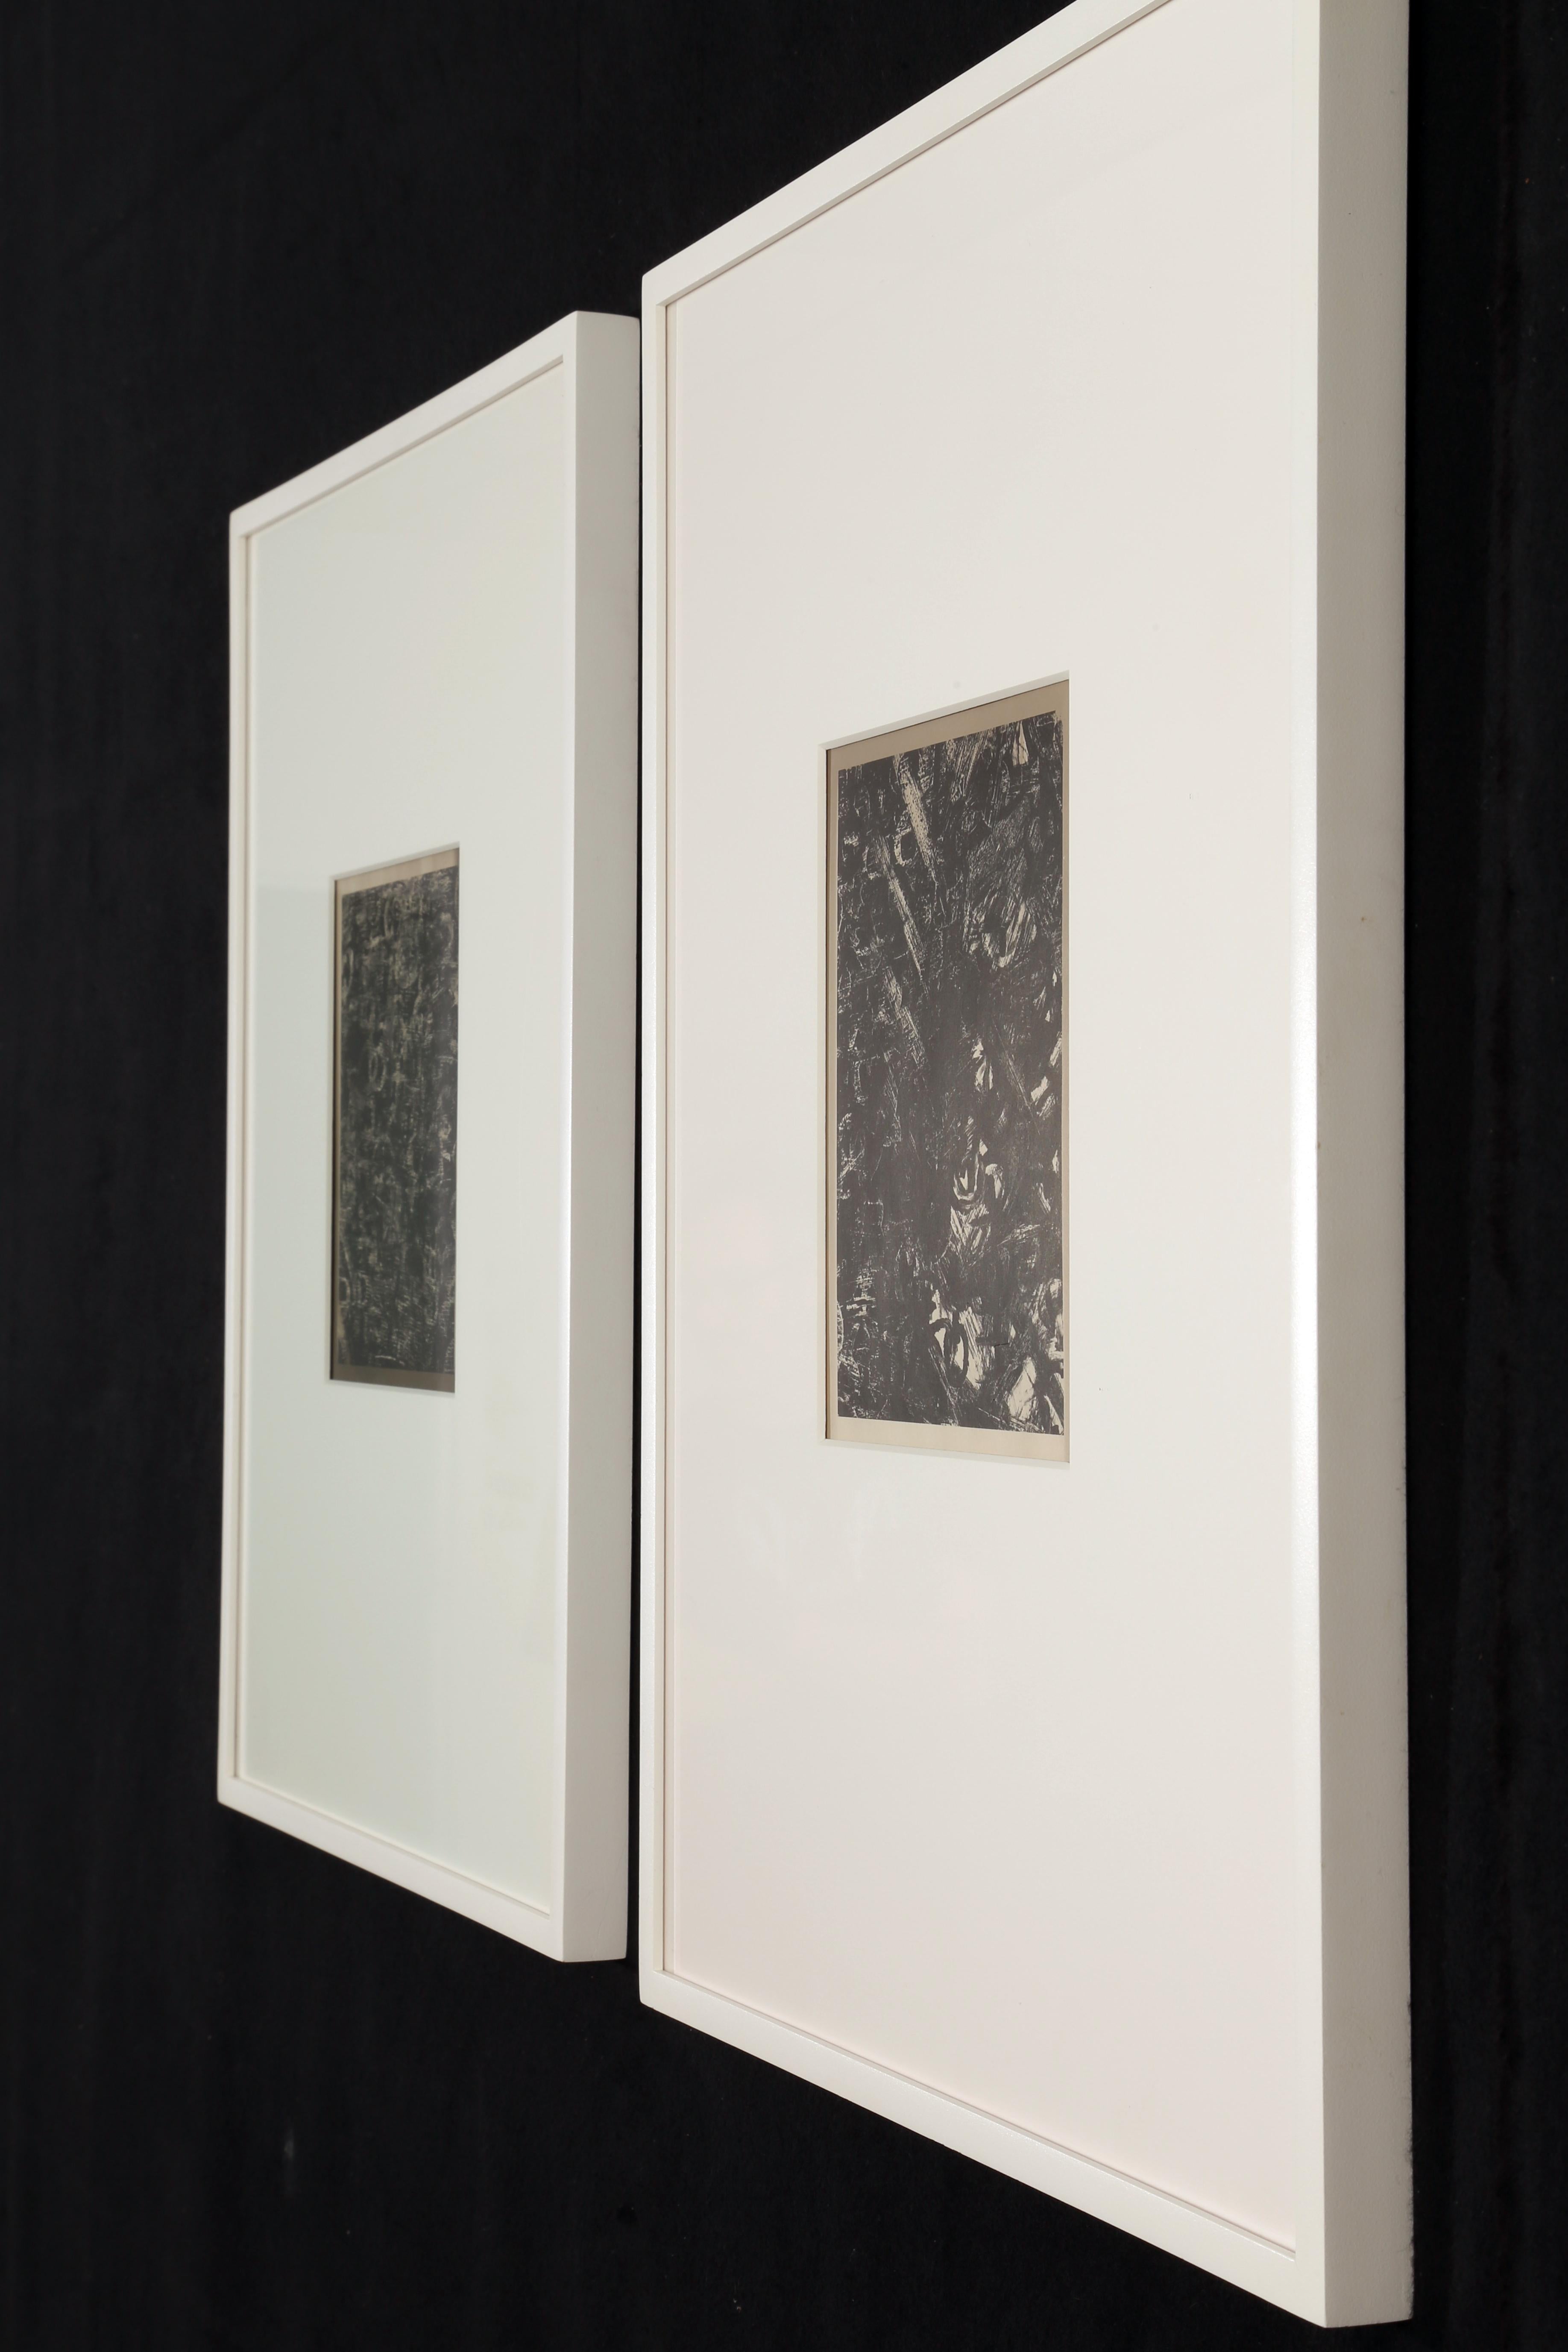 Anthony Pearson
Untitled (Solarization Diptych), 2010
Solarized silver gelatin photographs
Framed Dimensions: 17 1/2 x 13 1/4 x 3/4  inches  (44.5 x 33.7 x 1.9 cm)  each 